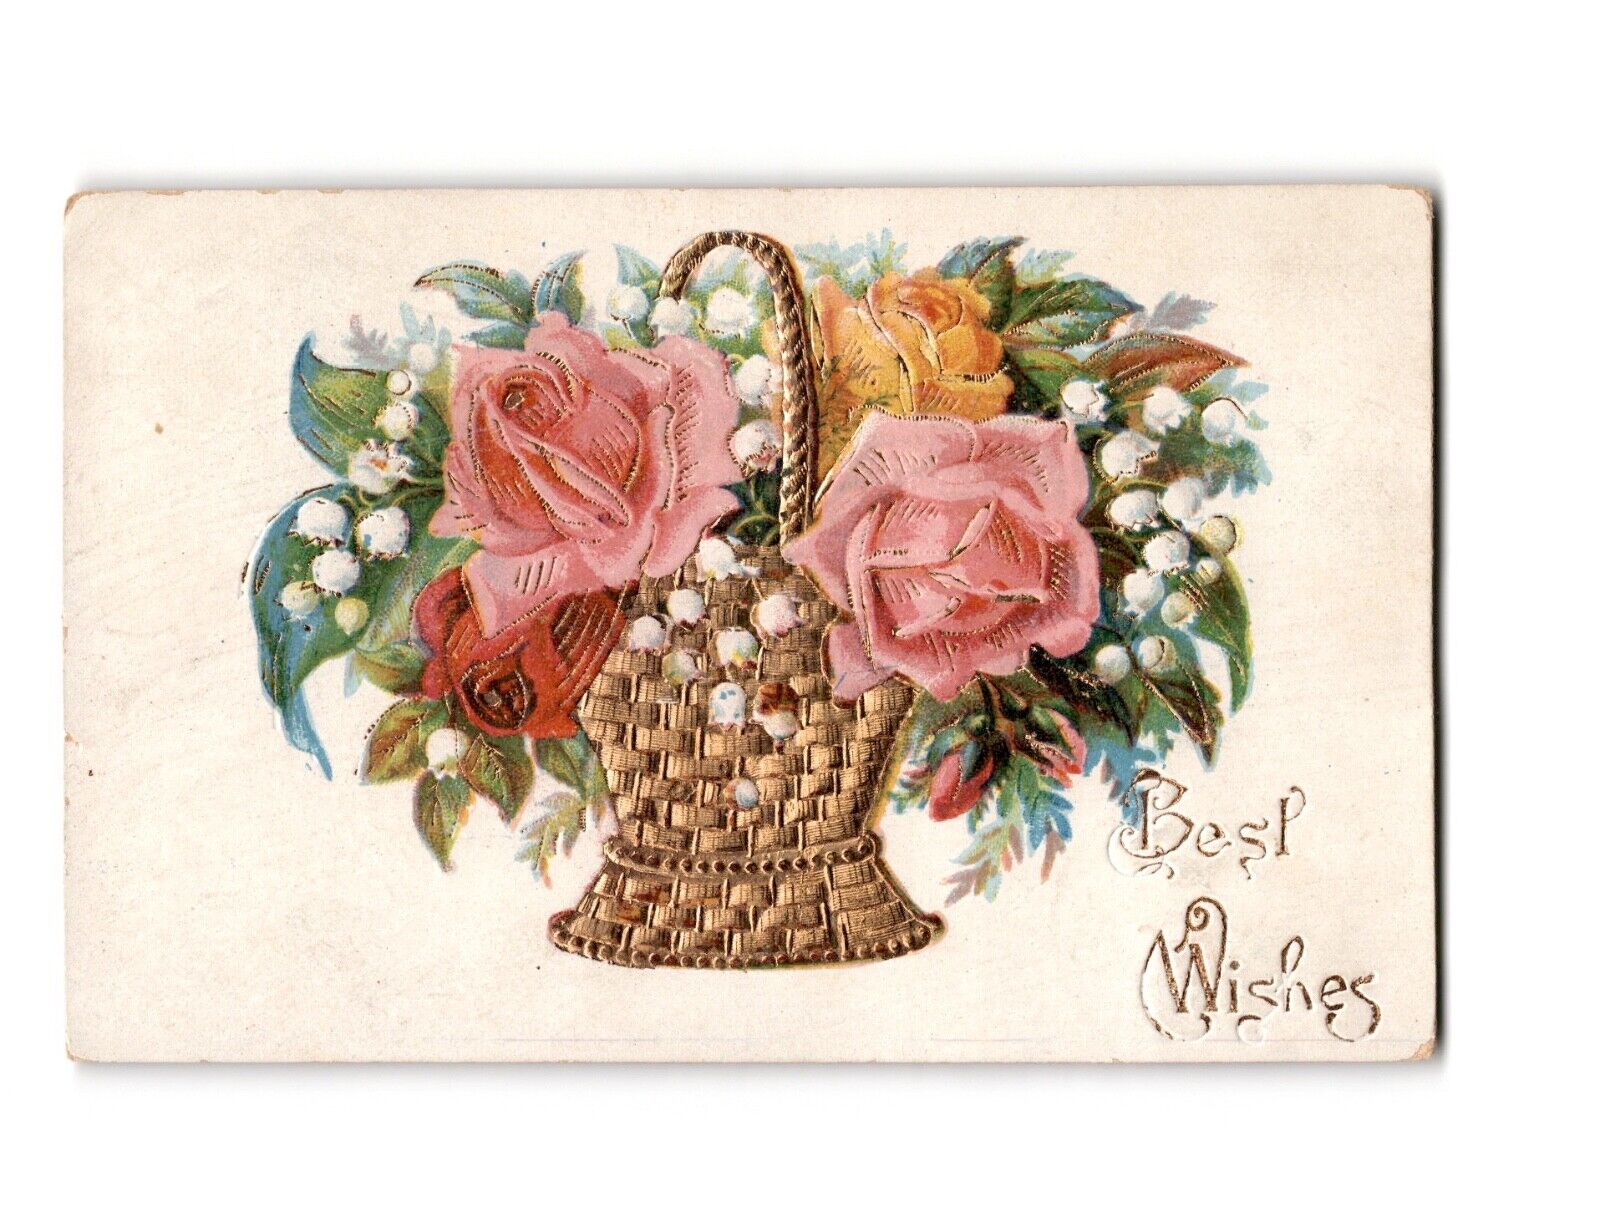 Antique German Floral Postcard - Best Wishes, Early 1900s with US Stamp